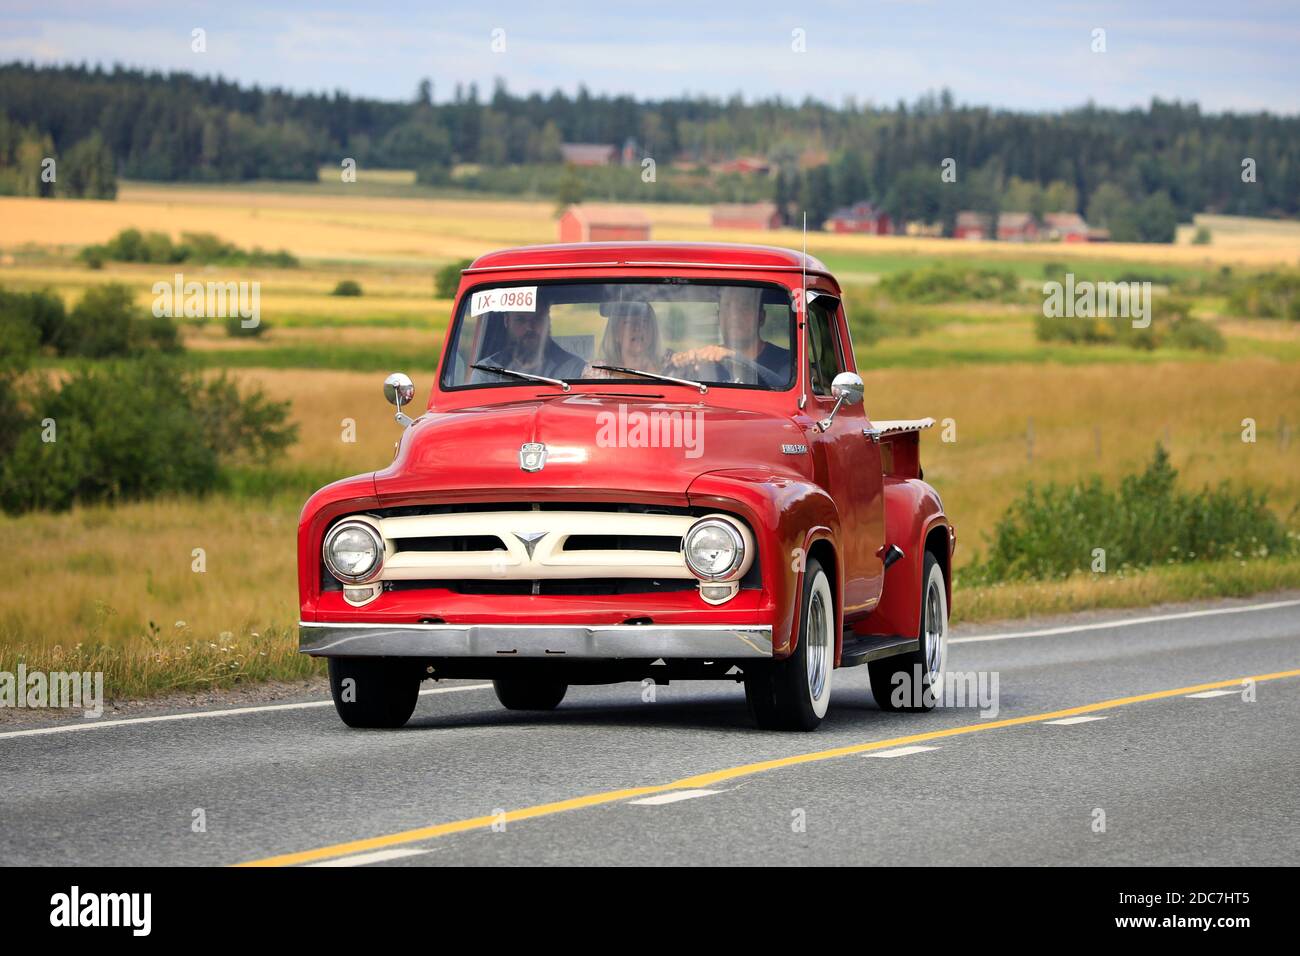 Driving red Ford F100 pickup truck, early to mid 1950s, Maisemaruise 2019 car cruise. Vaulammi, Finland. August  3, 2019. Stock Photo